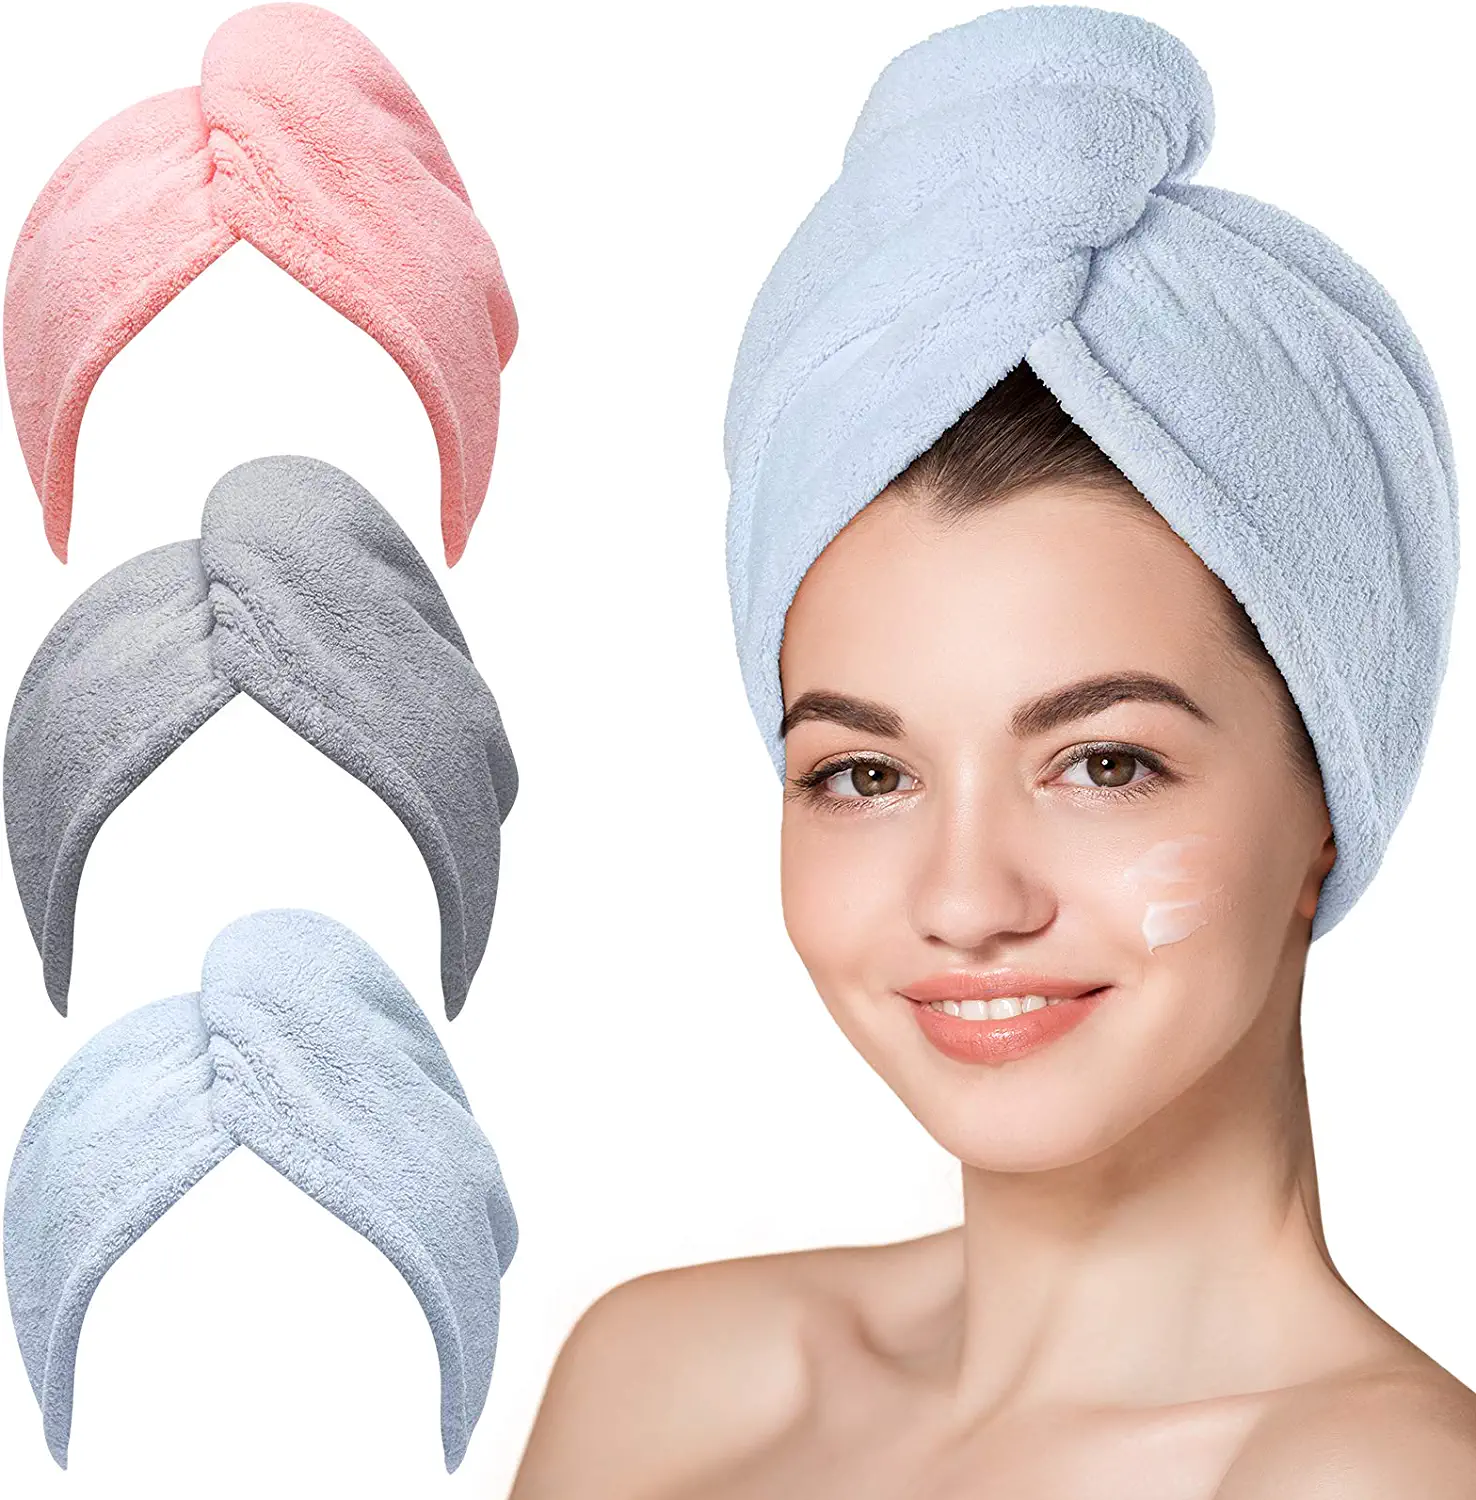 Hicober Breathable Towel Turbans, 3-Pack